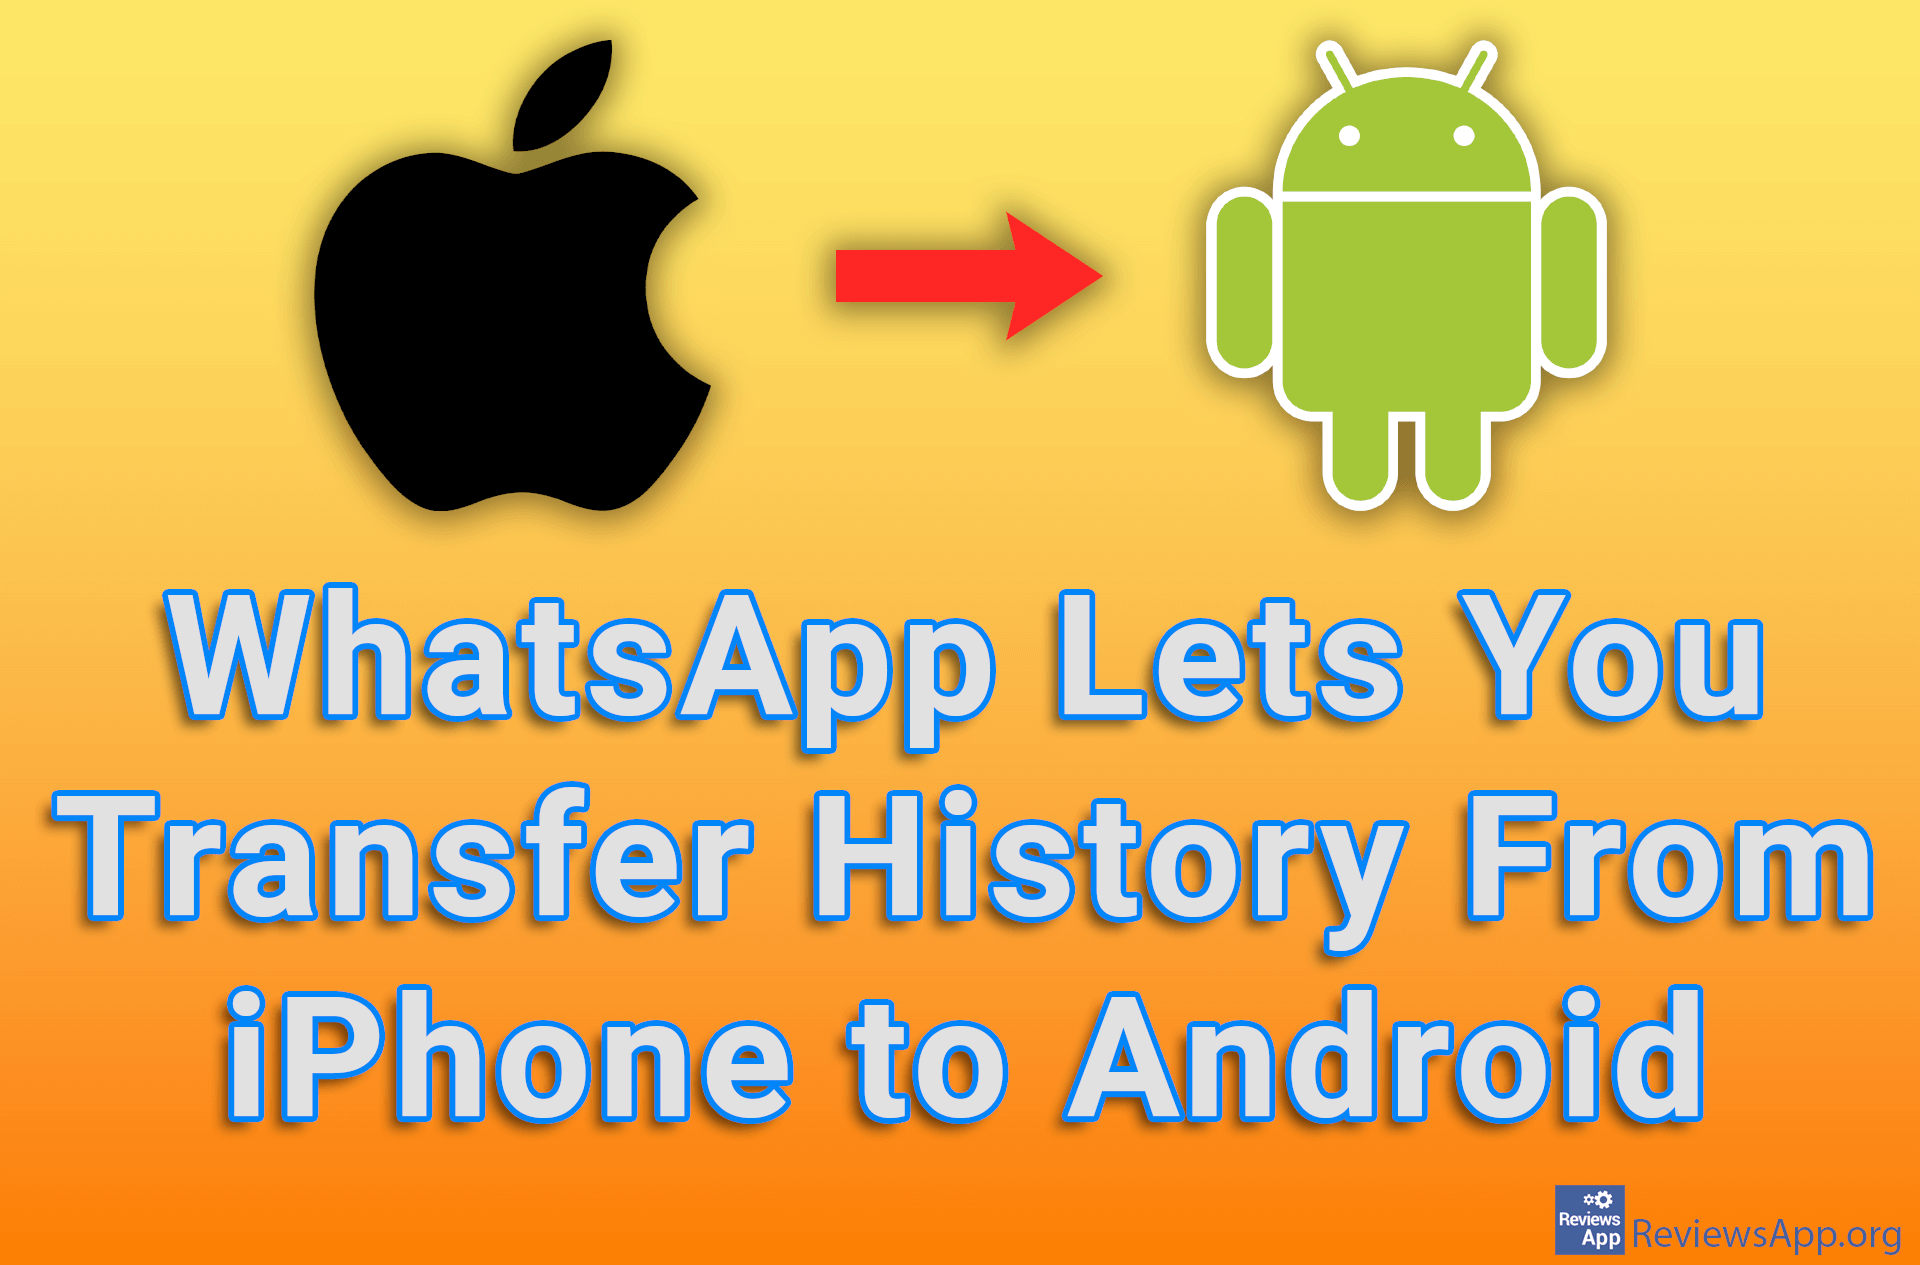 WhatsApp Lets You Transfer History From iPhone to Android